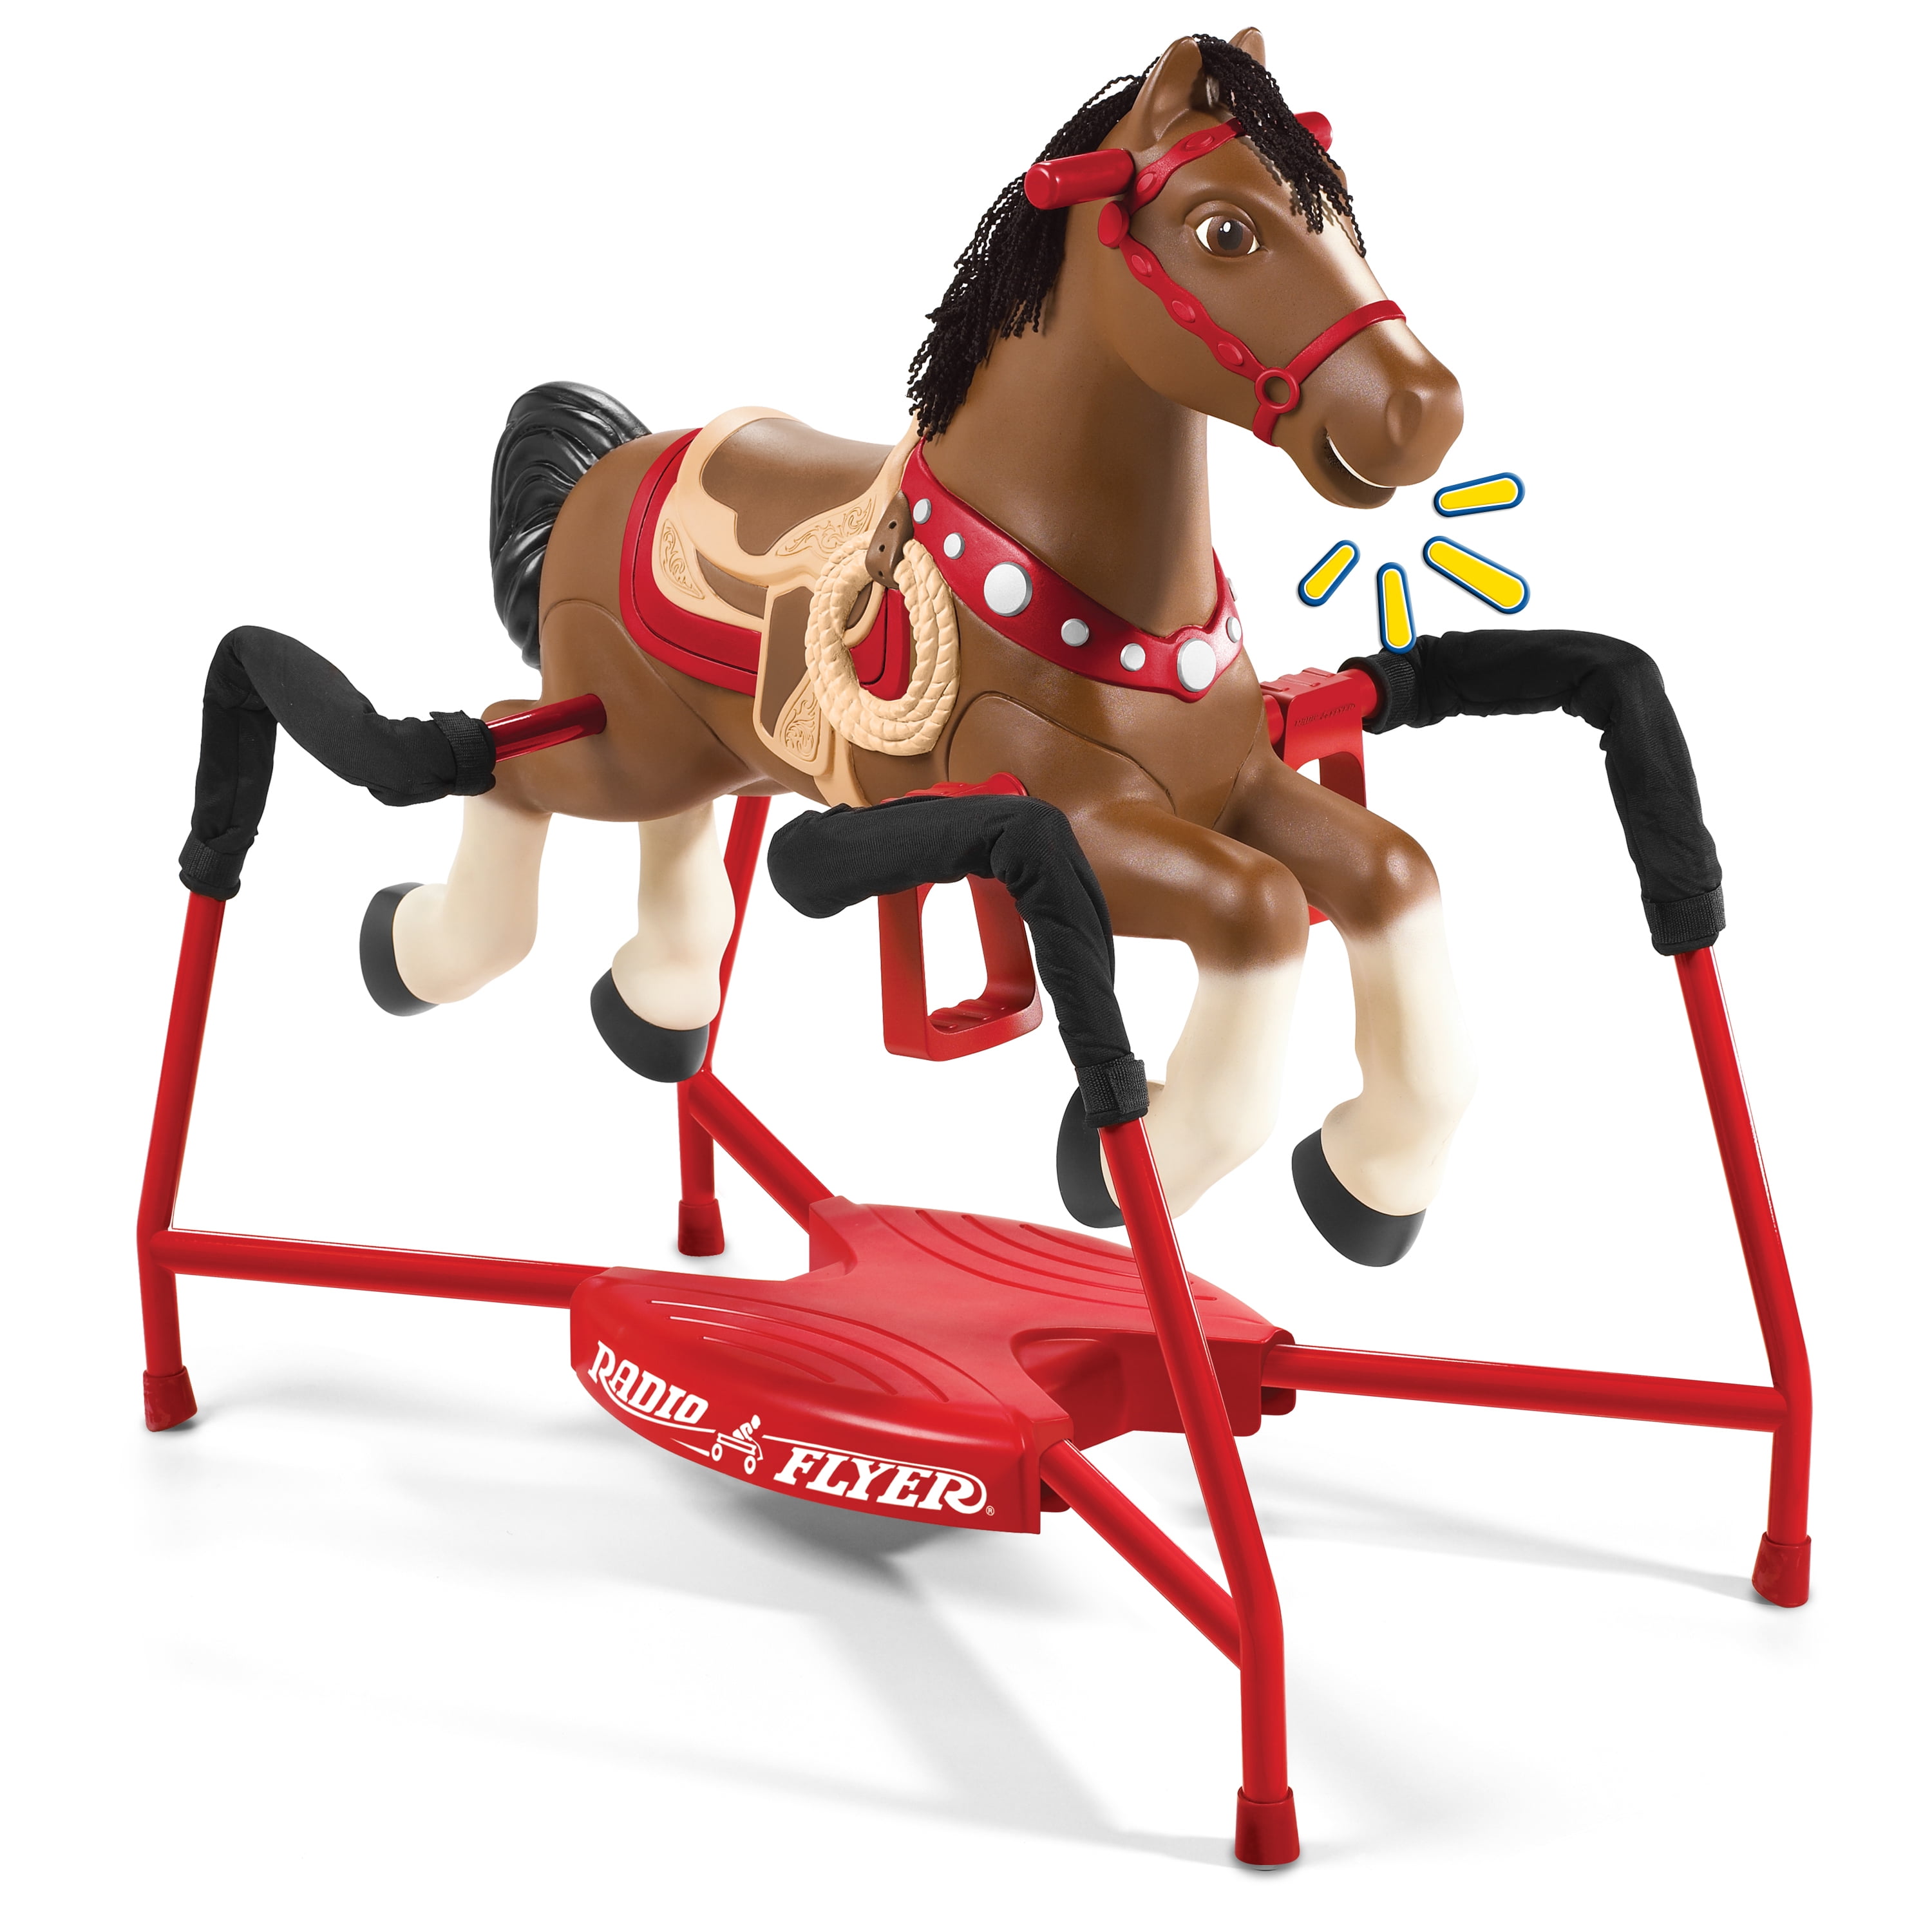 Radio Flyer, Blaze Interactive Spring Horse, Ride-on with Sounds - 1